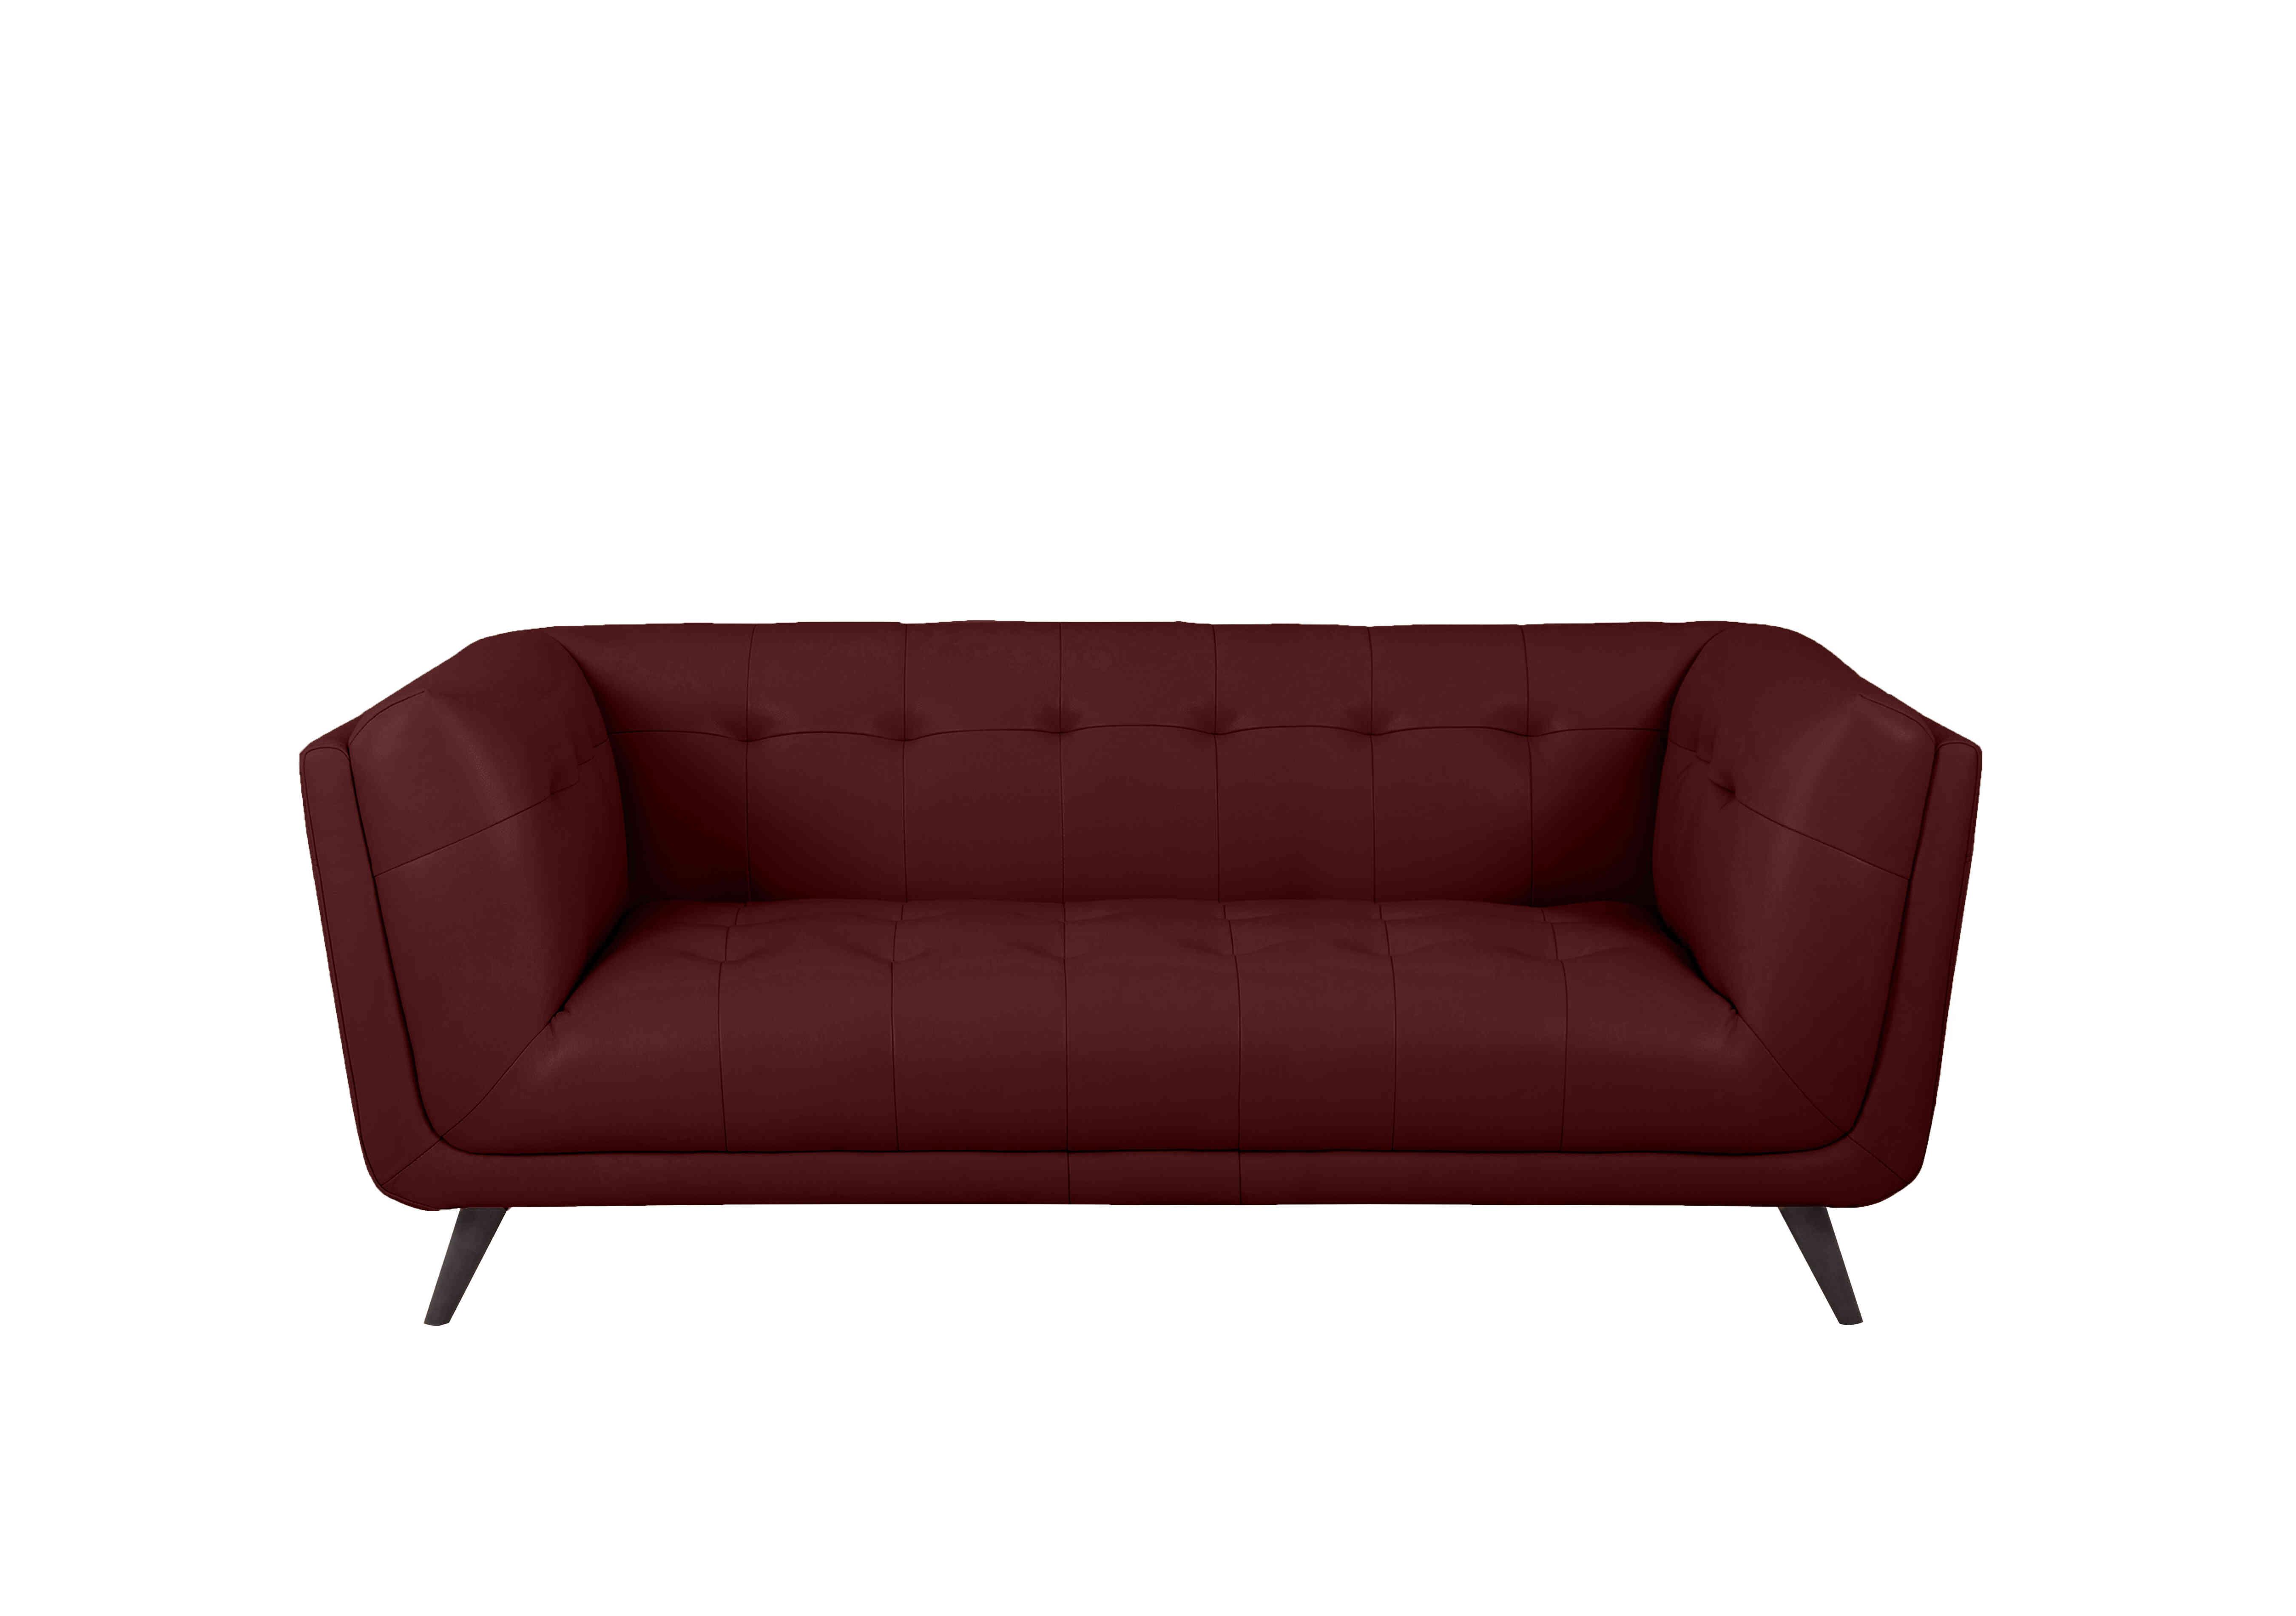 Rene Large 2 Seater Leather Sofa in Montana Ruby on Furniture Village